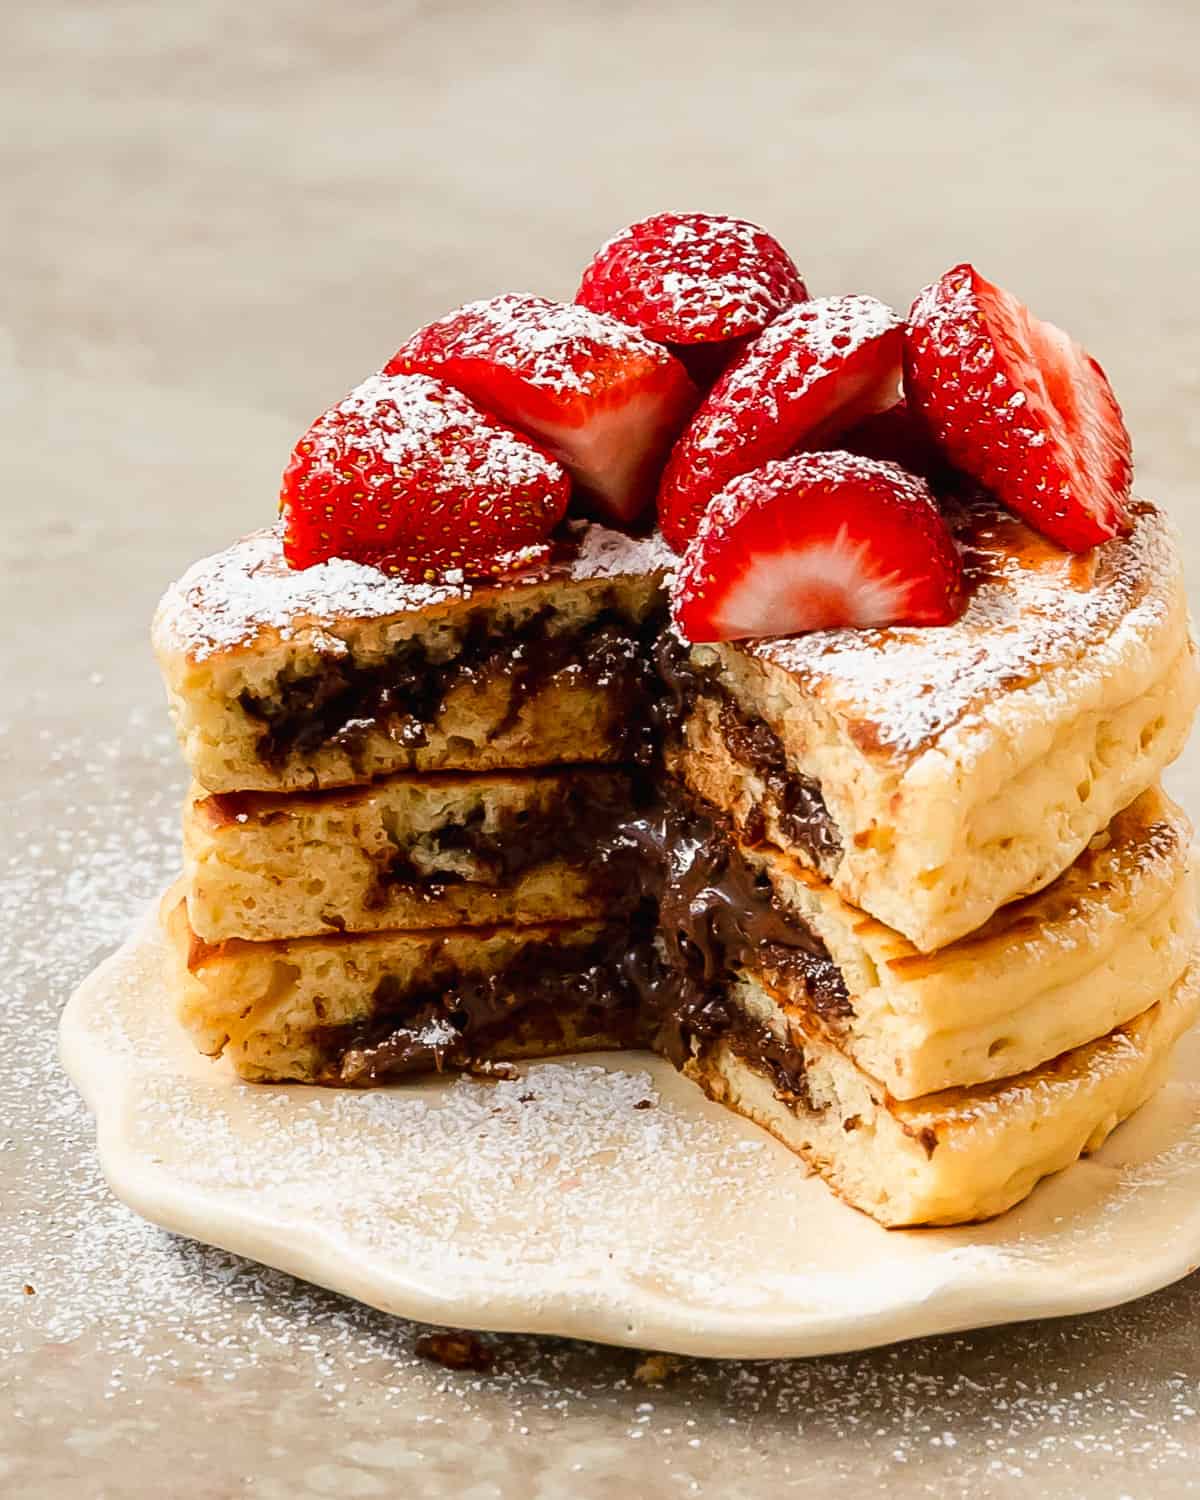 Nutella pancakes are light, fluffy and flavorful pancakes stuffed with creamy Nutella. Learn how to make these decadent and incredibly delicious Nutella stuffed pancakes in a few easy steps. A stack of these from homemade pancakes with Nutella makes the perfect special breakfast everyone will love.